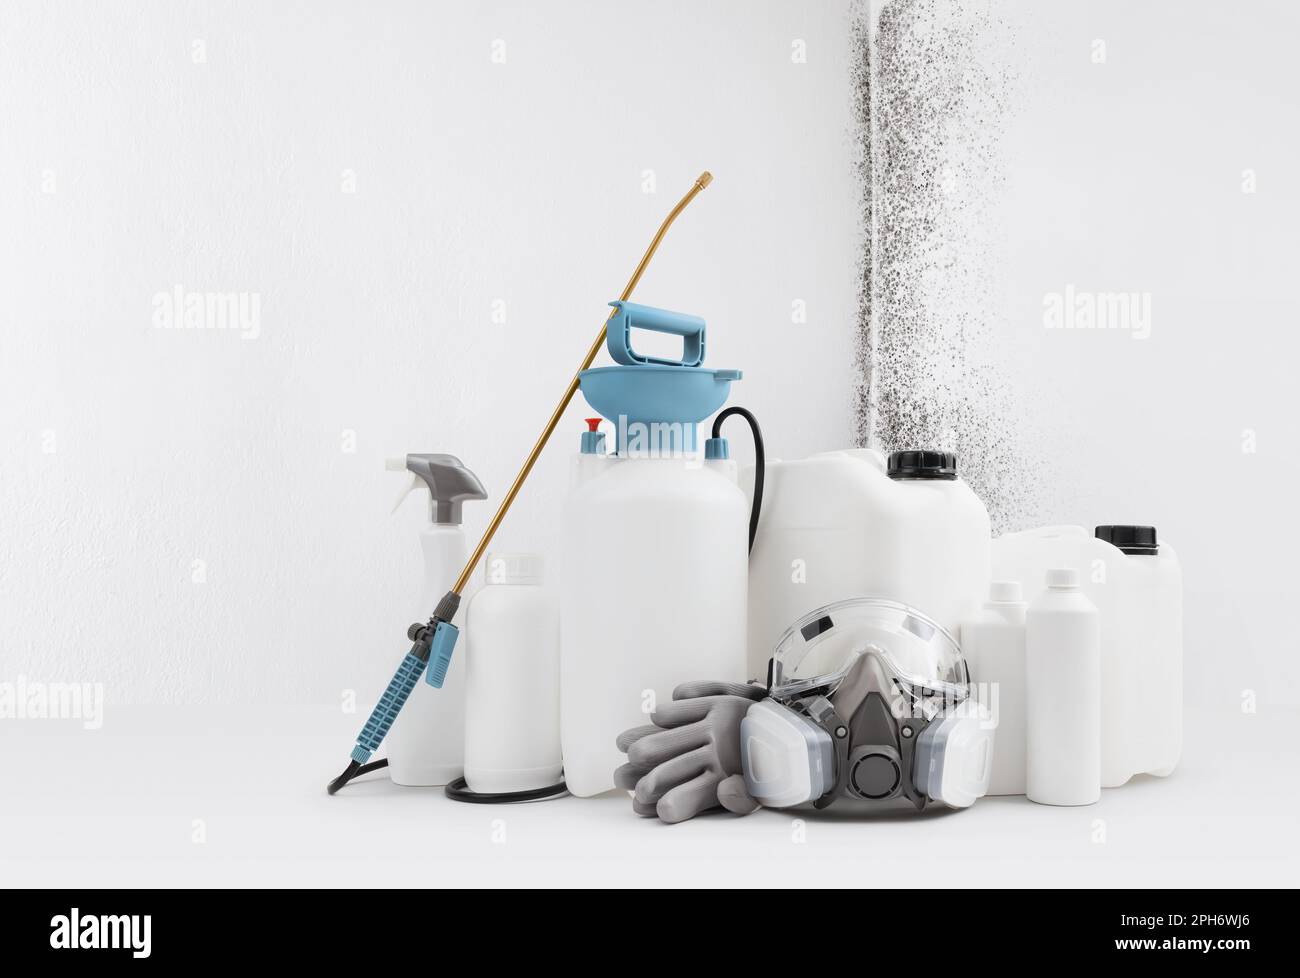 Cleaning and disinfection tools kit, isolated on white wall with mold  background. Protective respirator mask, manual pump nebulizer and jerry can  to d Stock Photo - Alamy